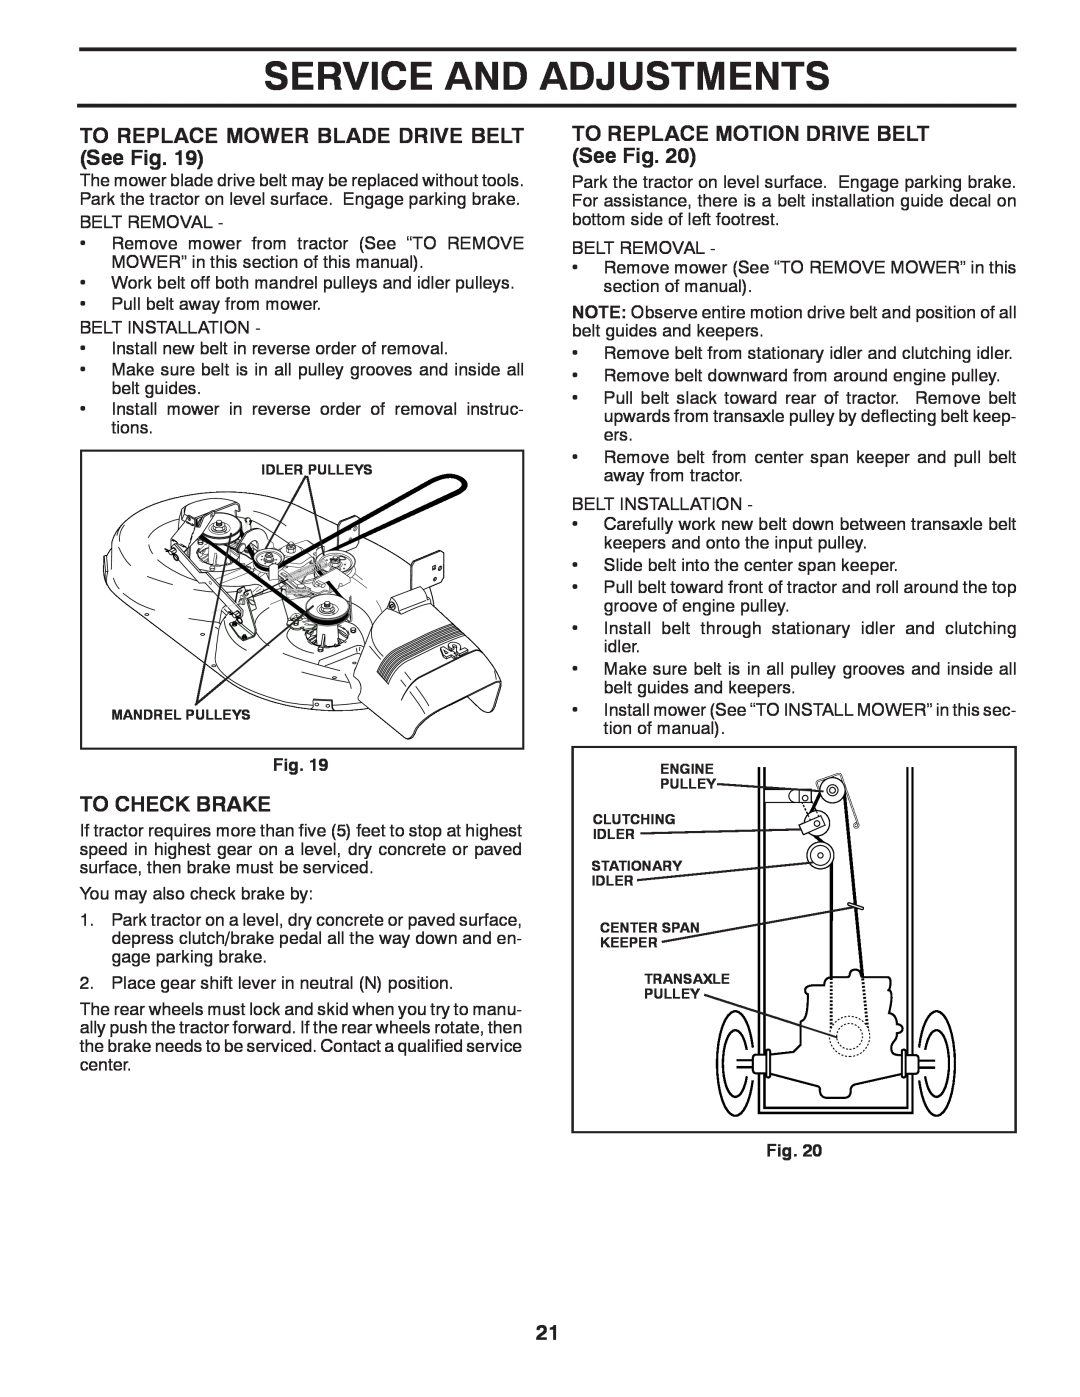 Poulan 96018000400 manual TO REPLACE MOWER BLADE DRIVE BELT See Fig, To Check Brake, TO REPLACE MOTION DRIVE BELT See Fig 